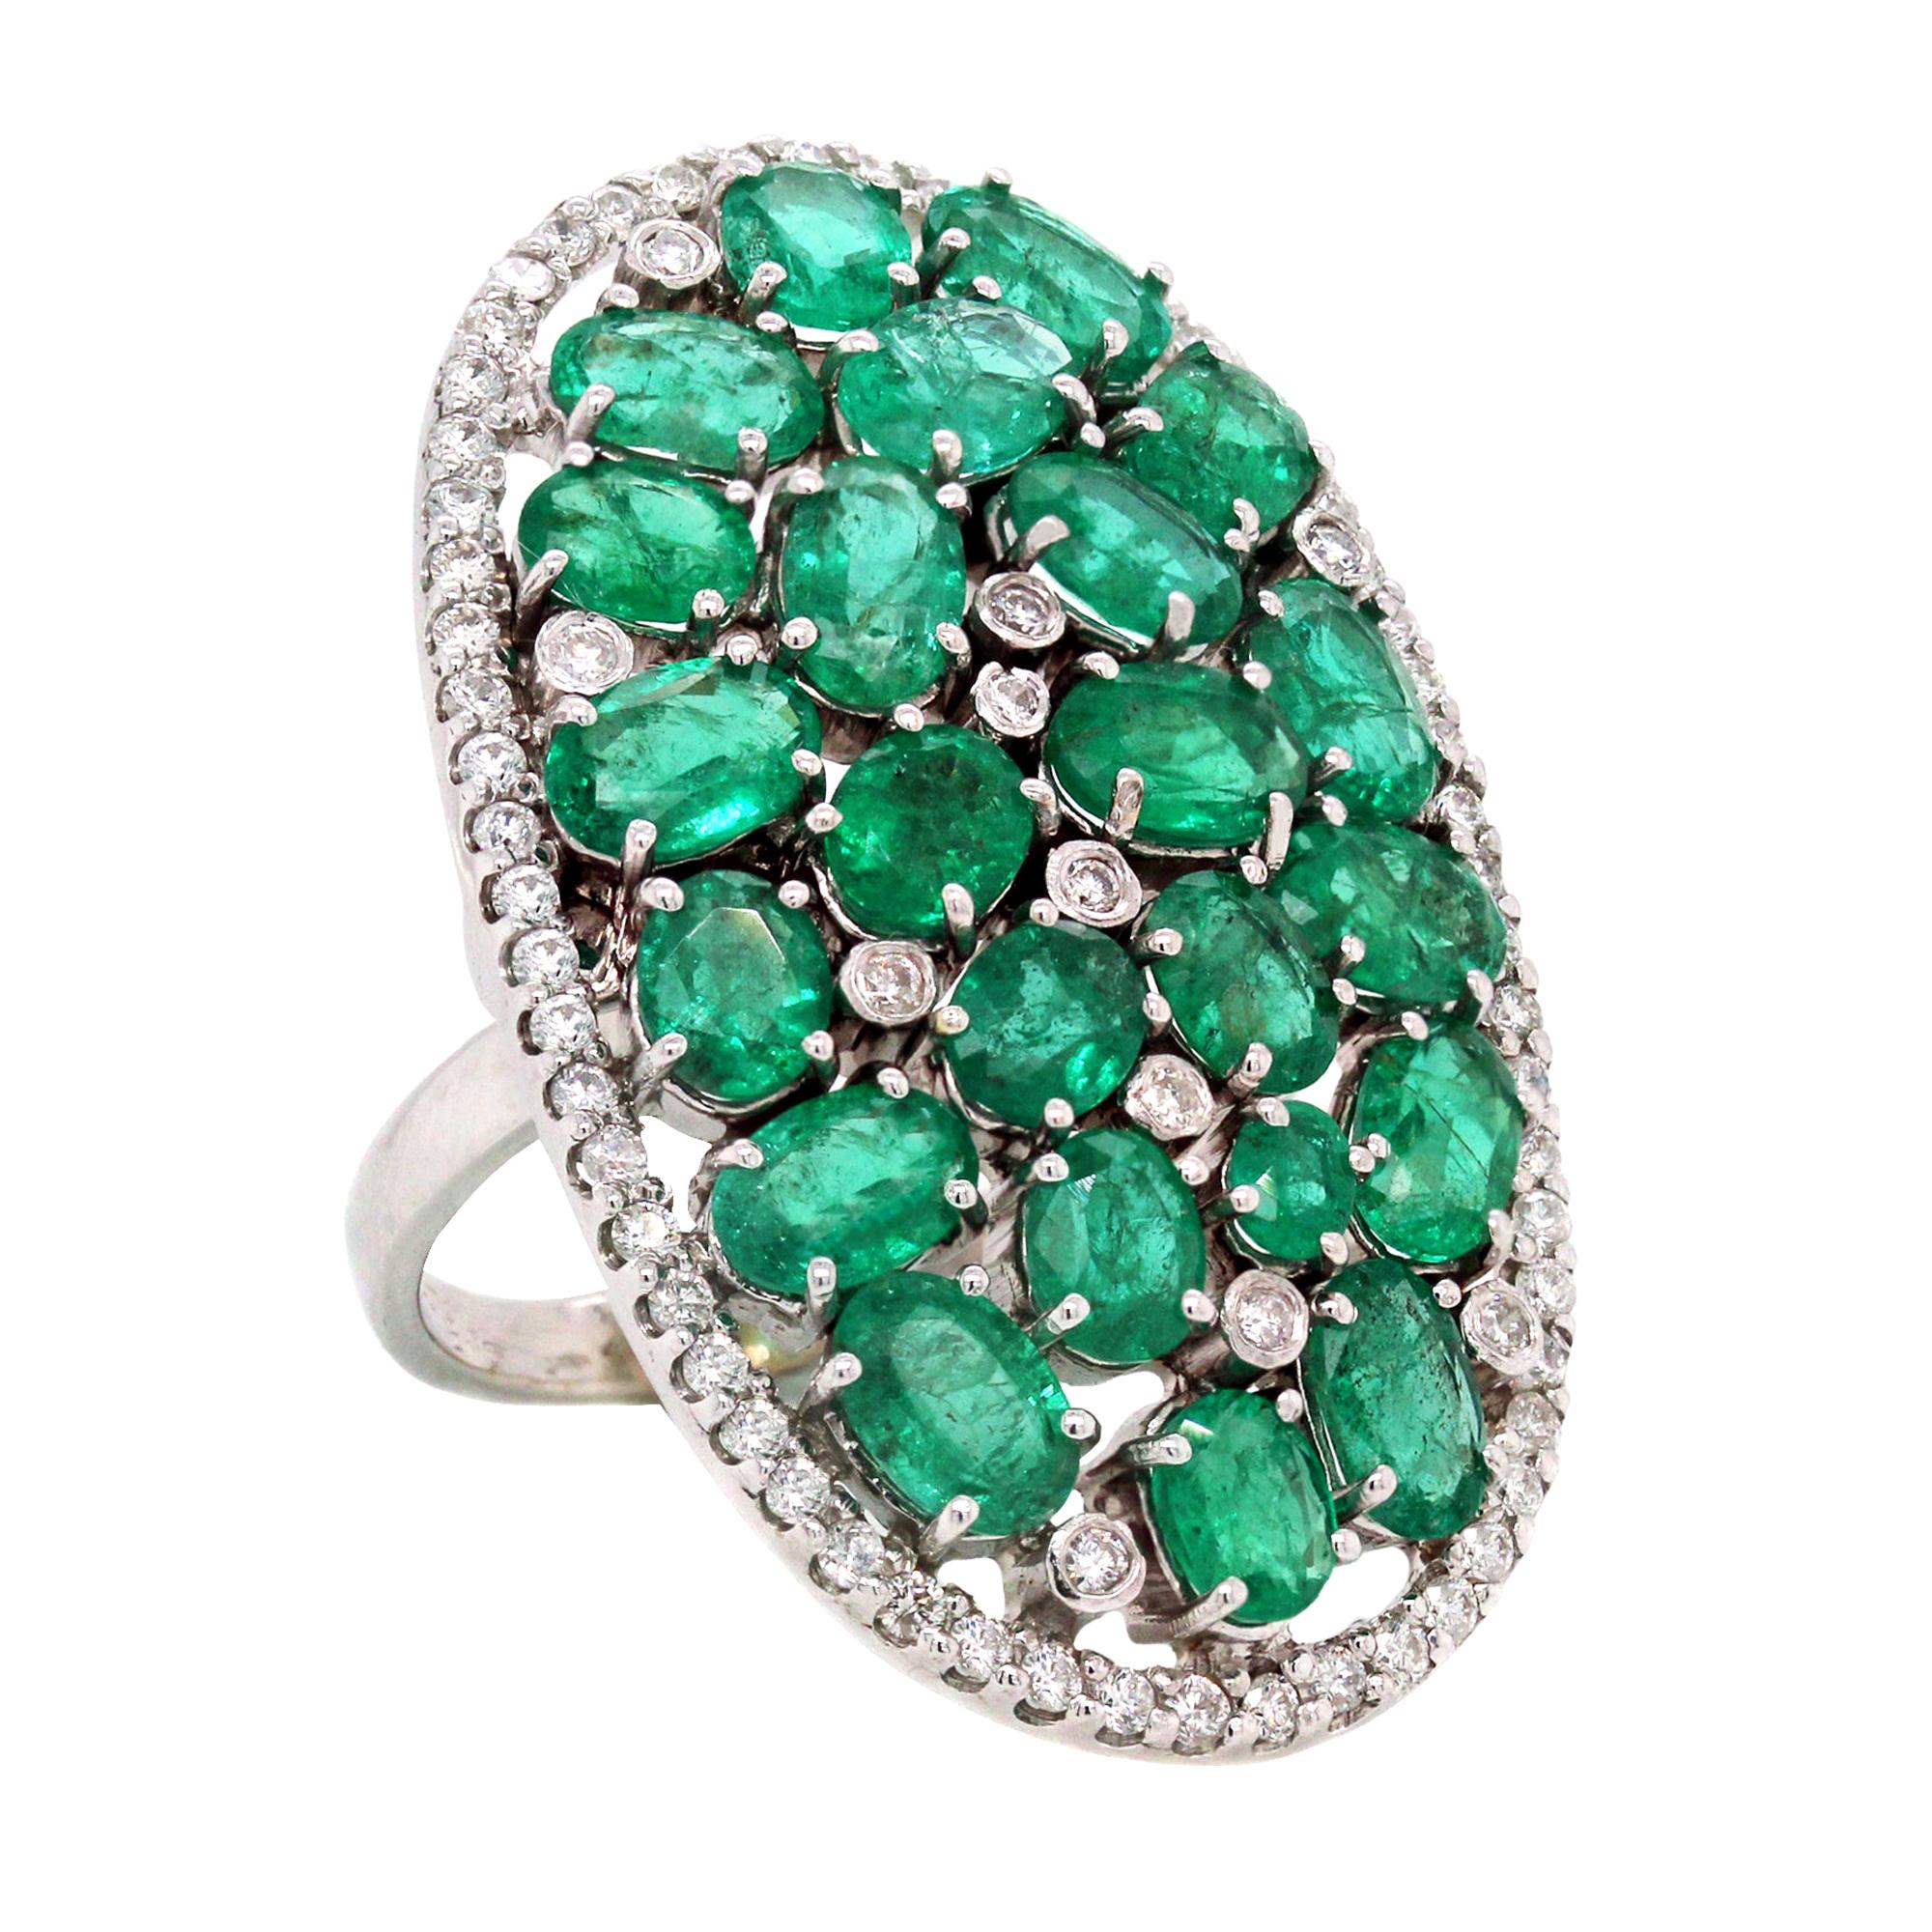 White Gold and Diamond Cluster Ring with Emeralds